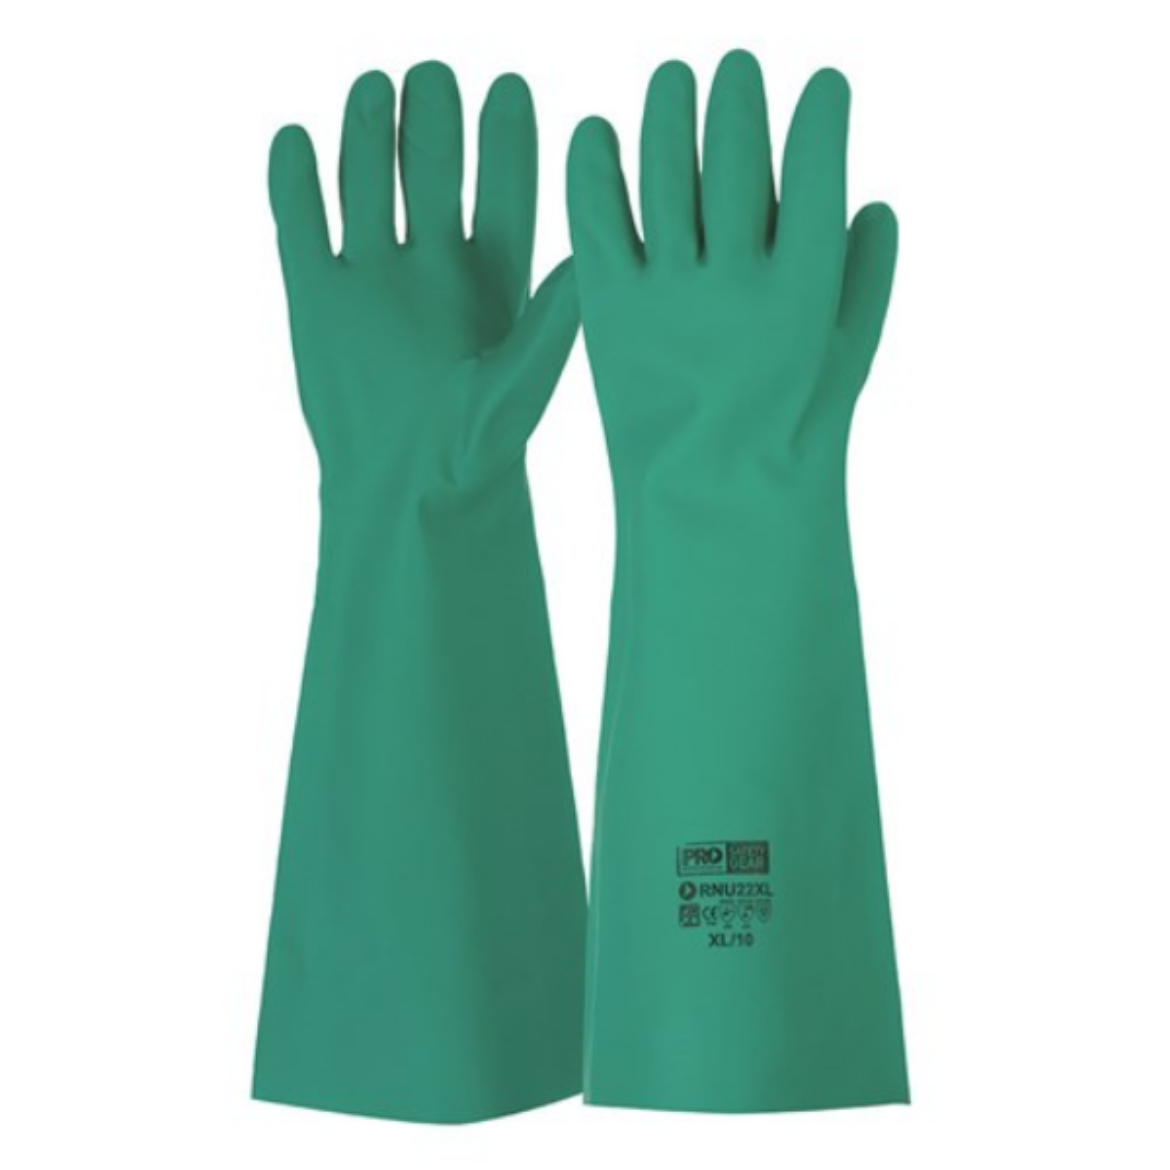 Picture of RNU22 (SIZE) - GREEN NITRILE GAUNTLET - LENGTH 45CM. AVAILABLE IN SIZES M/8, L/9, XL/10